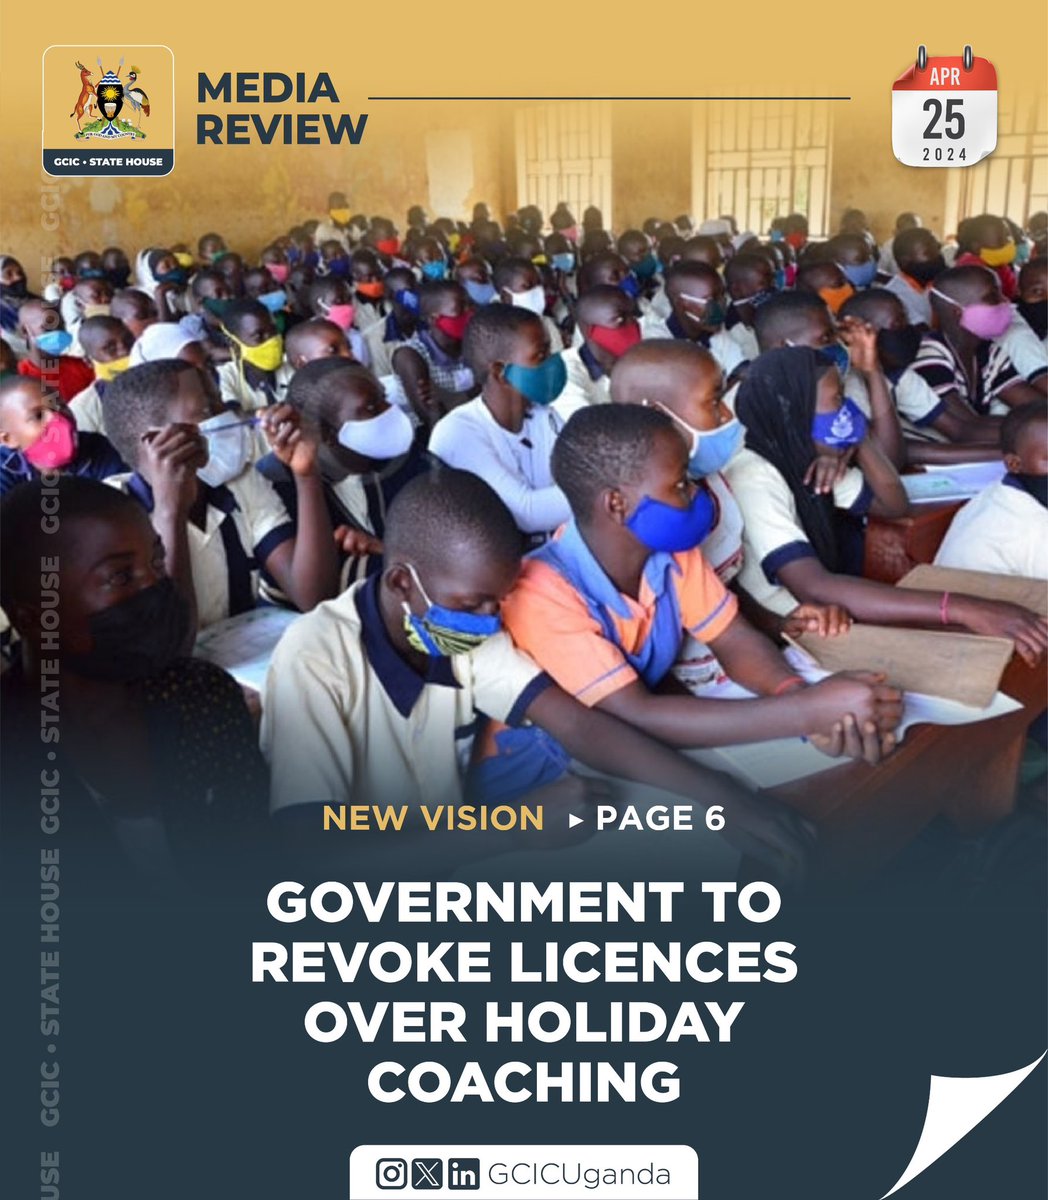 April 25, 2024 in the papers: 📌 President @KagutaMuseveni receives African Union delegation 📌 @Makerere moves to issue transcripts online 📌 @GovUganda probe reveals causes of school fires 📌 @GovUganda to revoke licences over holiday coaching #GCICMediaReview #OpenGovUg…